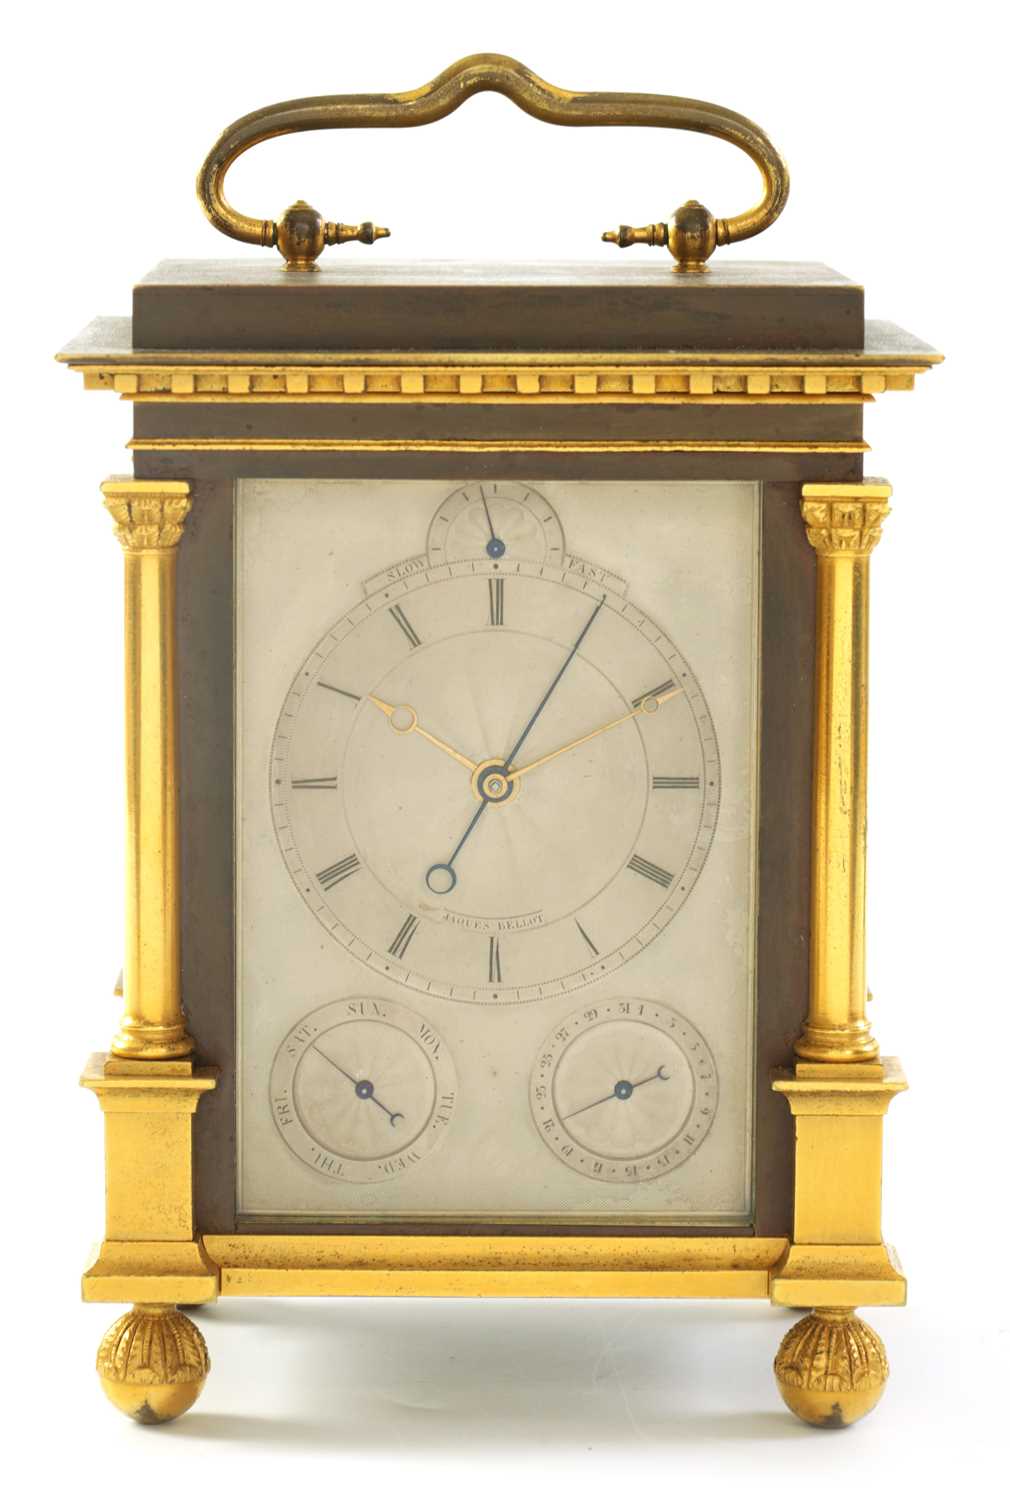 Lot 14 - JAQUES BELLOT, GENEVE.  A RARE EARLY 19TH CENTURY SWISS GILT AND PATINATED BRONZE GRANDE SONNERIE TRAVELLING CLOCK WITH CENTRE SECONDS AND CALENDAR WORK